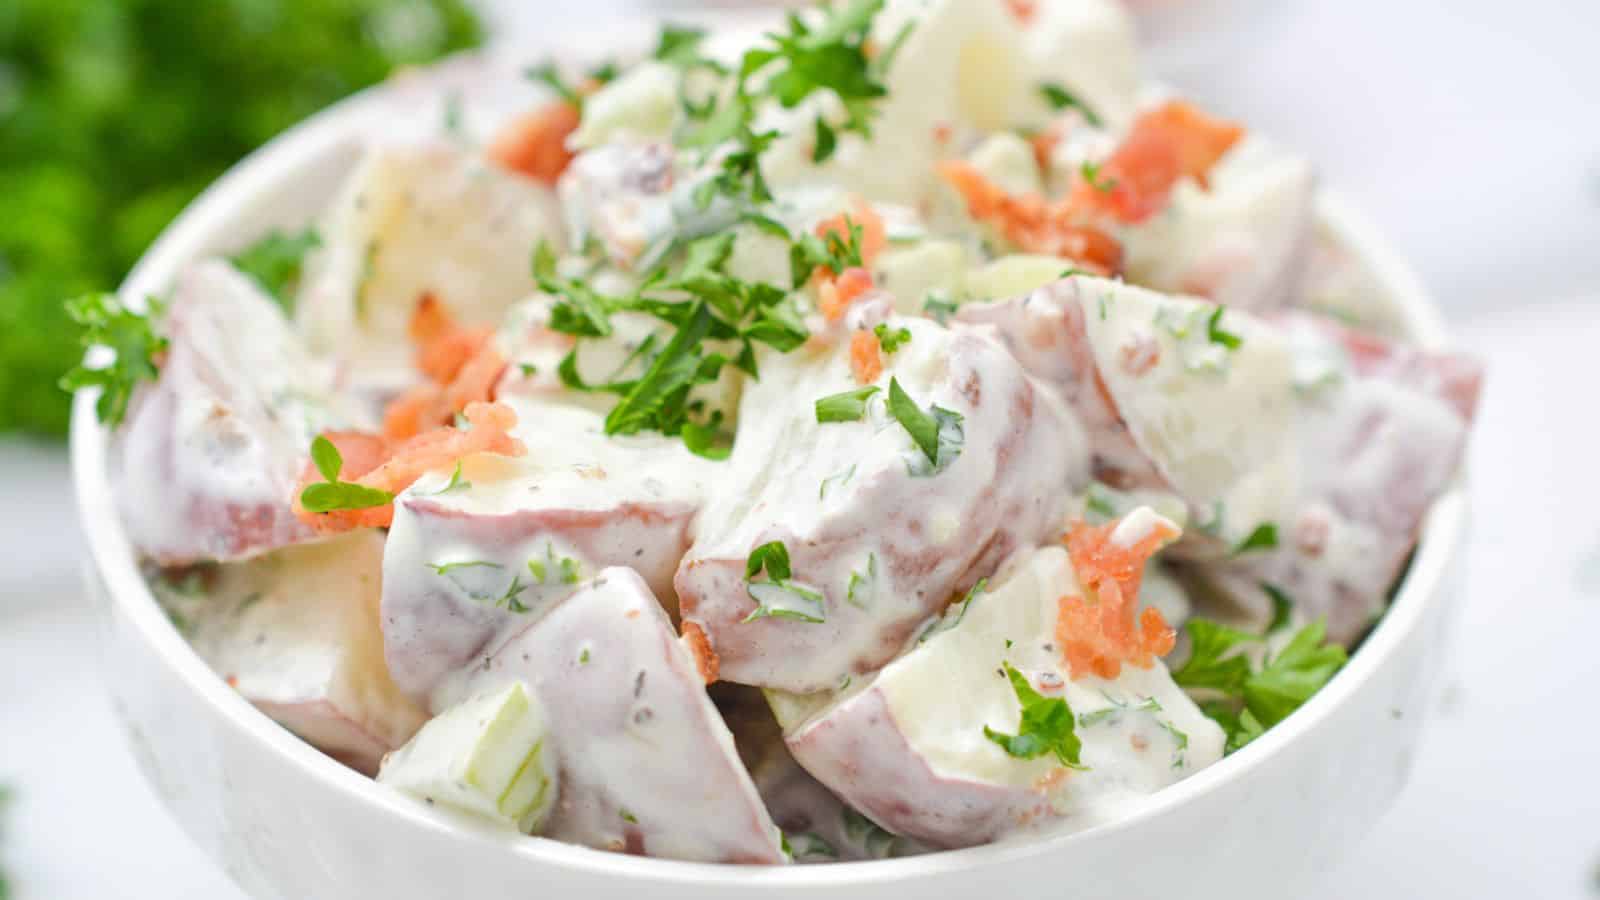 Bowl of potato salad garnished with fresh herbs and bacon on a white background.